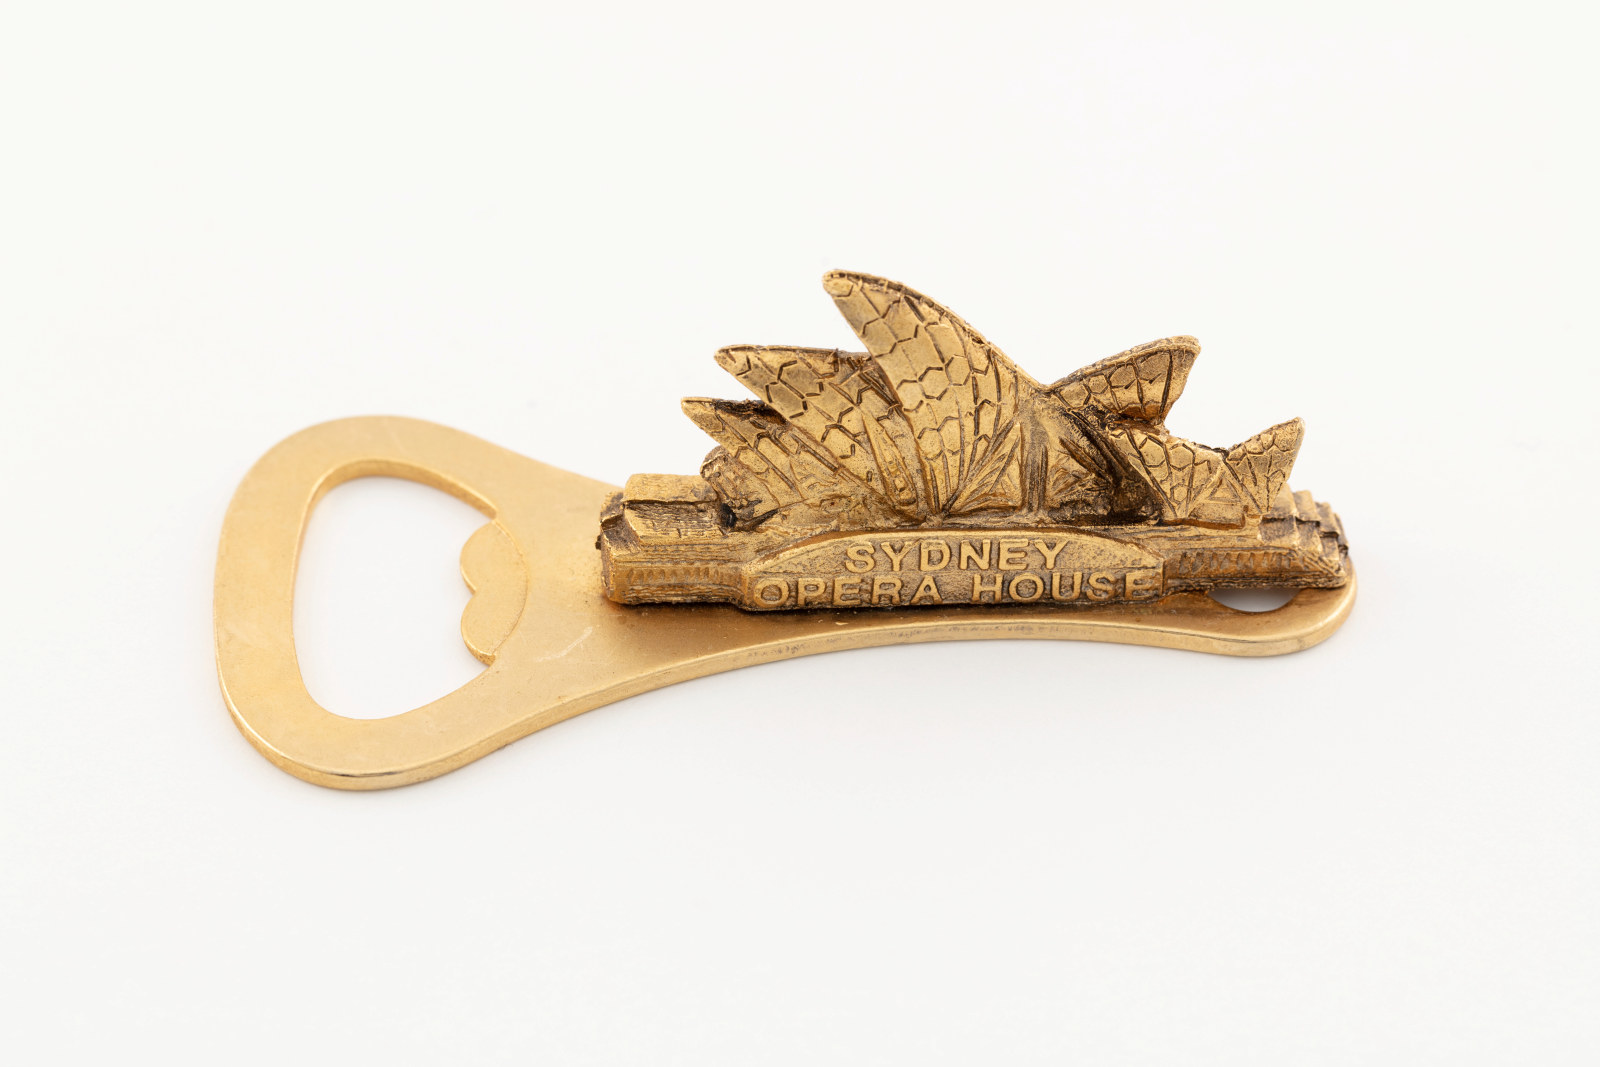 K539-122 Bottle Opener (1 of 282), Sydney Opera House handle, brass, maker unknown, place of production unknown, date unknown